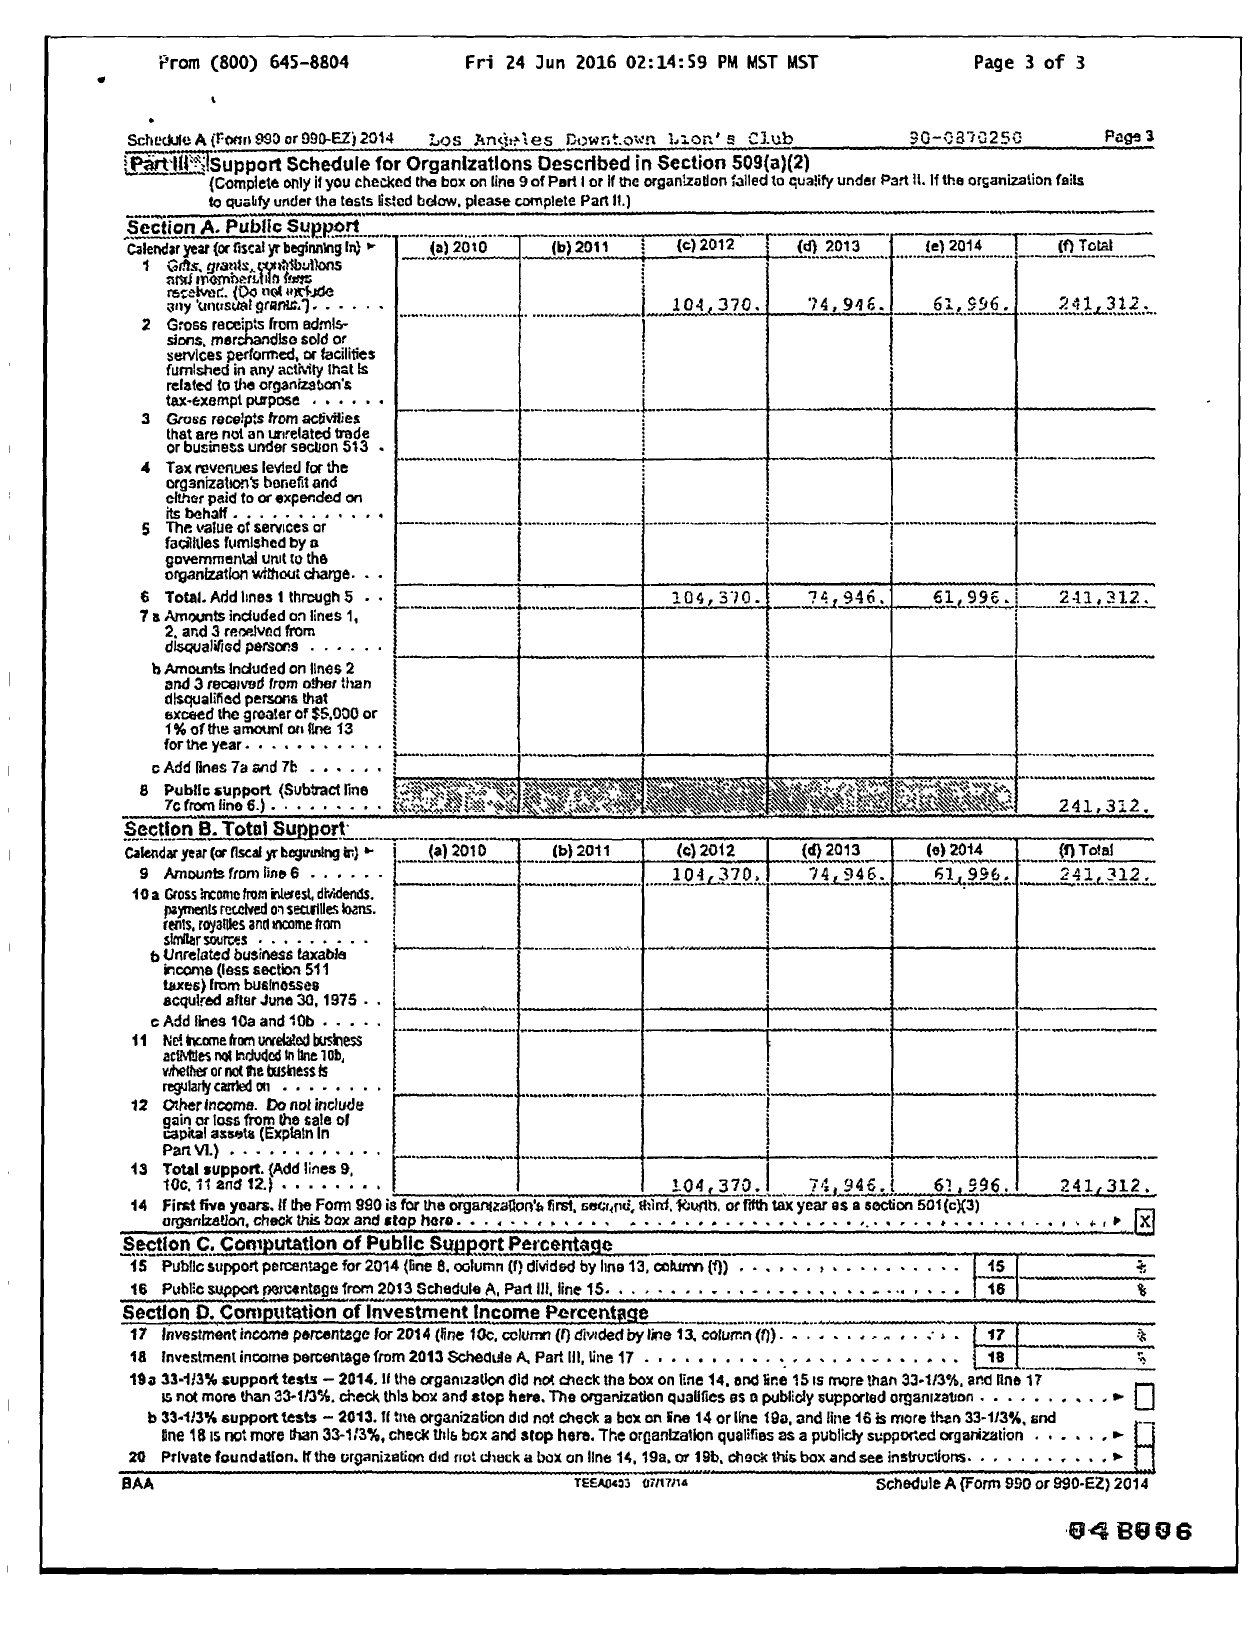 Image of first page of 2014 Form 990R for Los Angeles Downtown Lion's Club